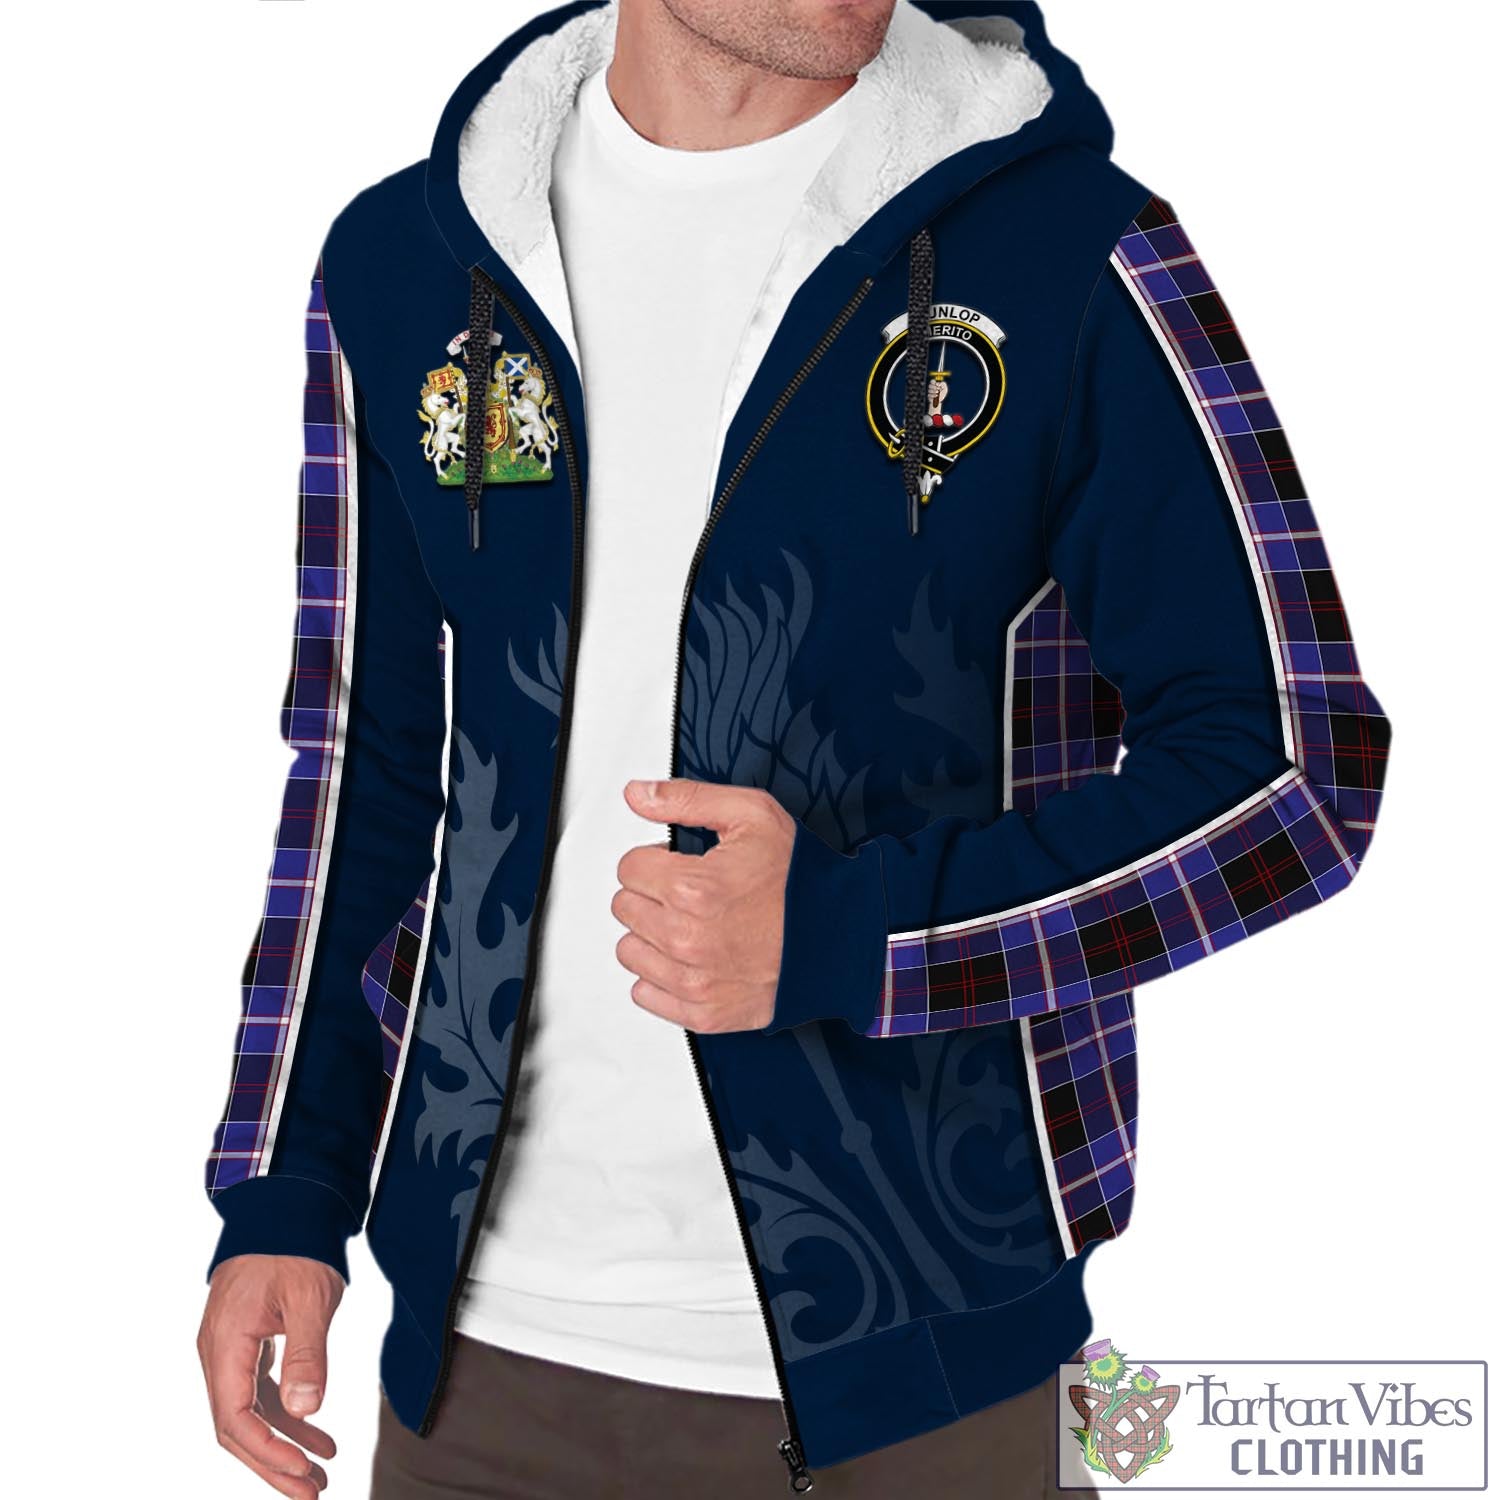 Tartan Vibes Clothing Dunlop Modern Tartan Sherpa Hoodie with Family Crest and Scottish Thistle Vibes Sport Style